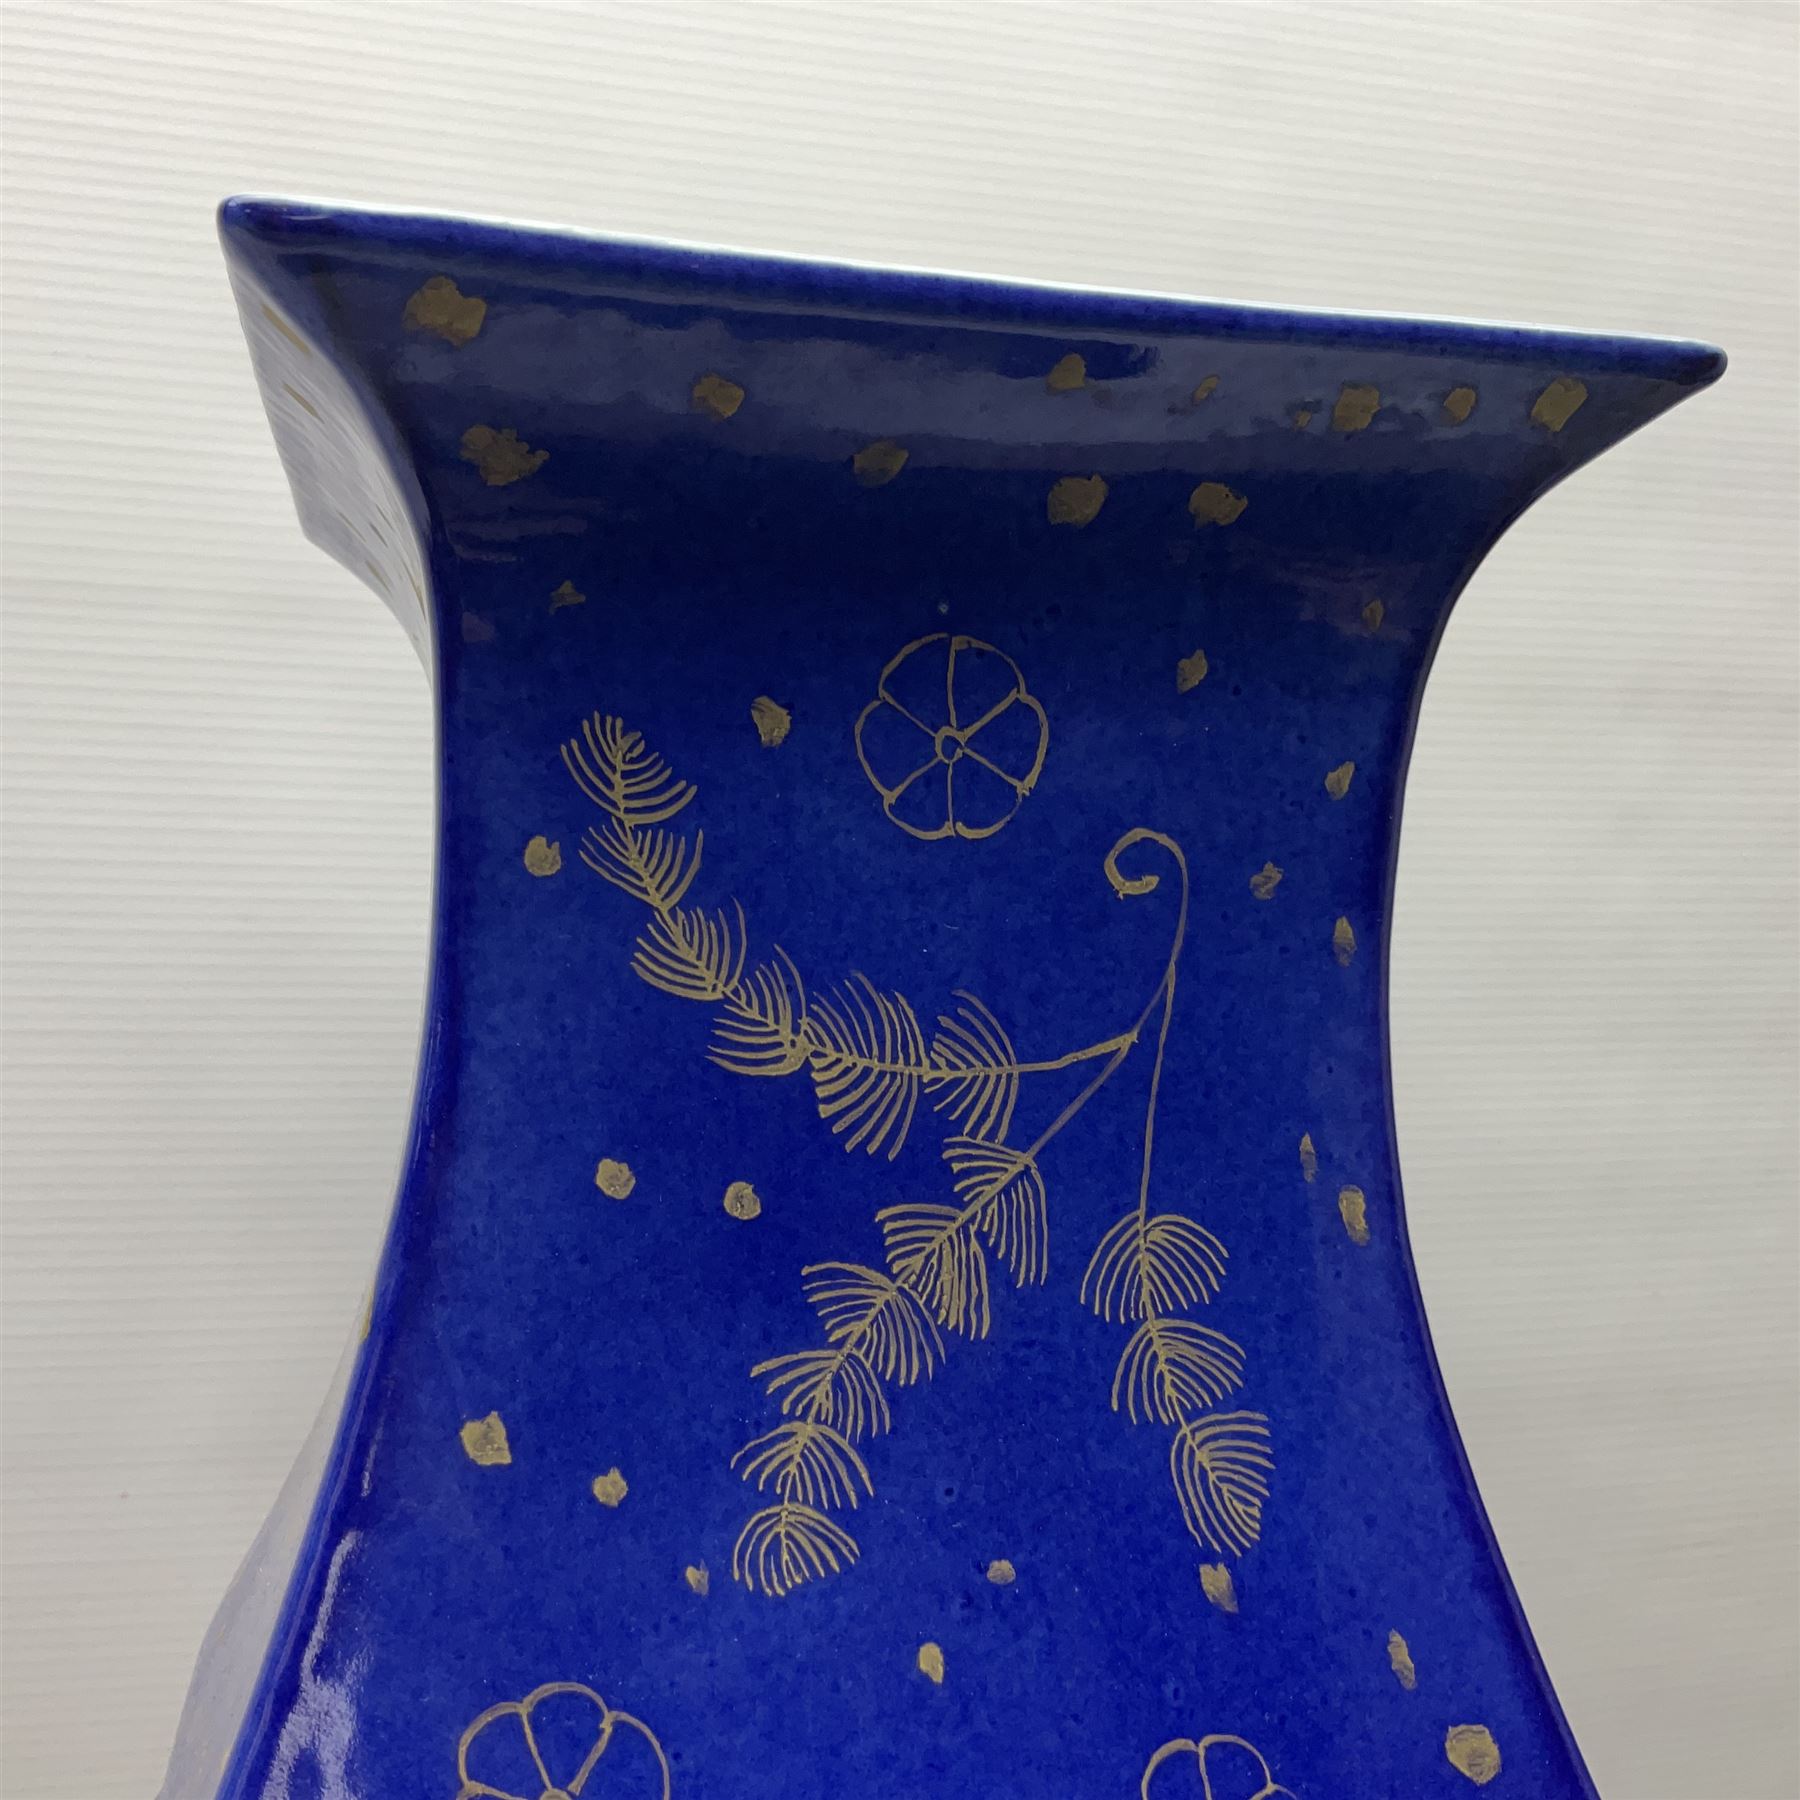 19th/ early 20th century Chinese powder blue vase - Image 5 of 12